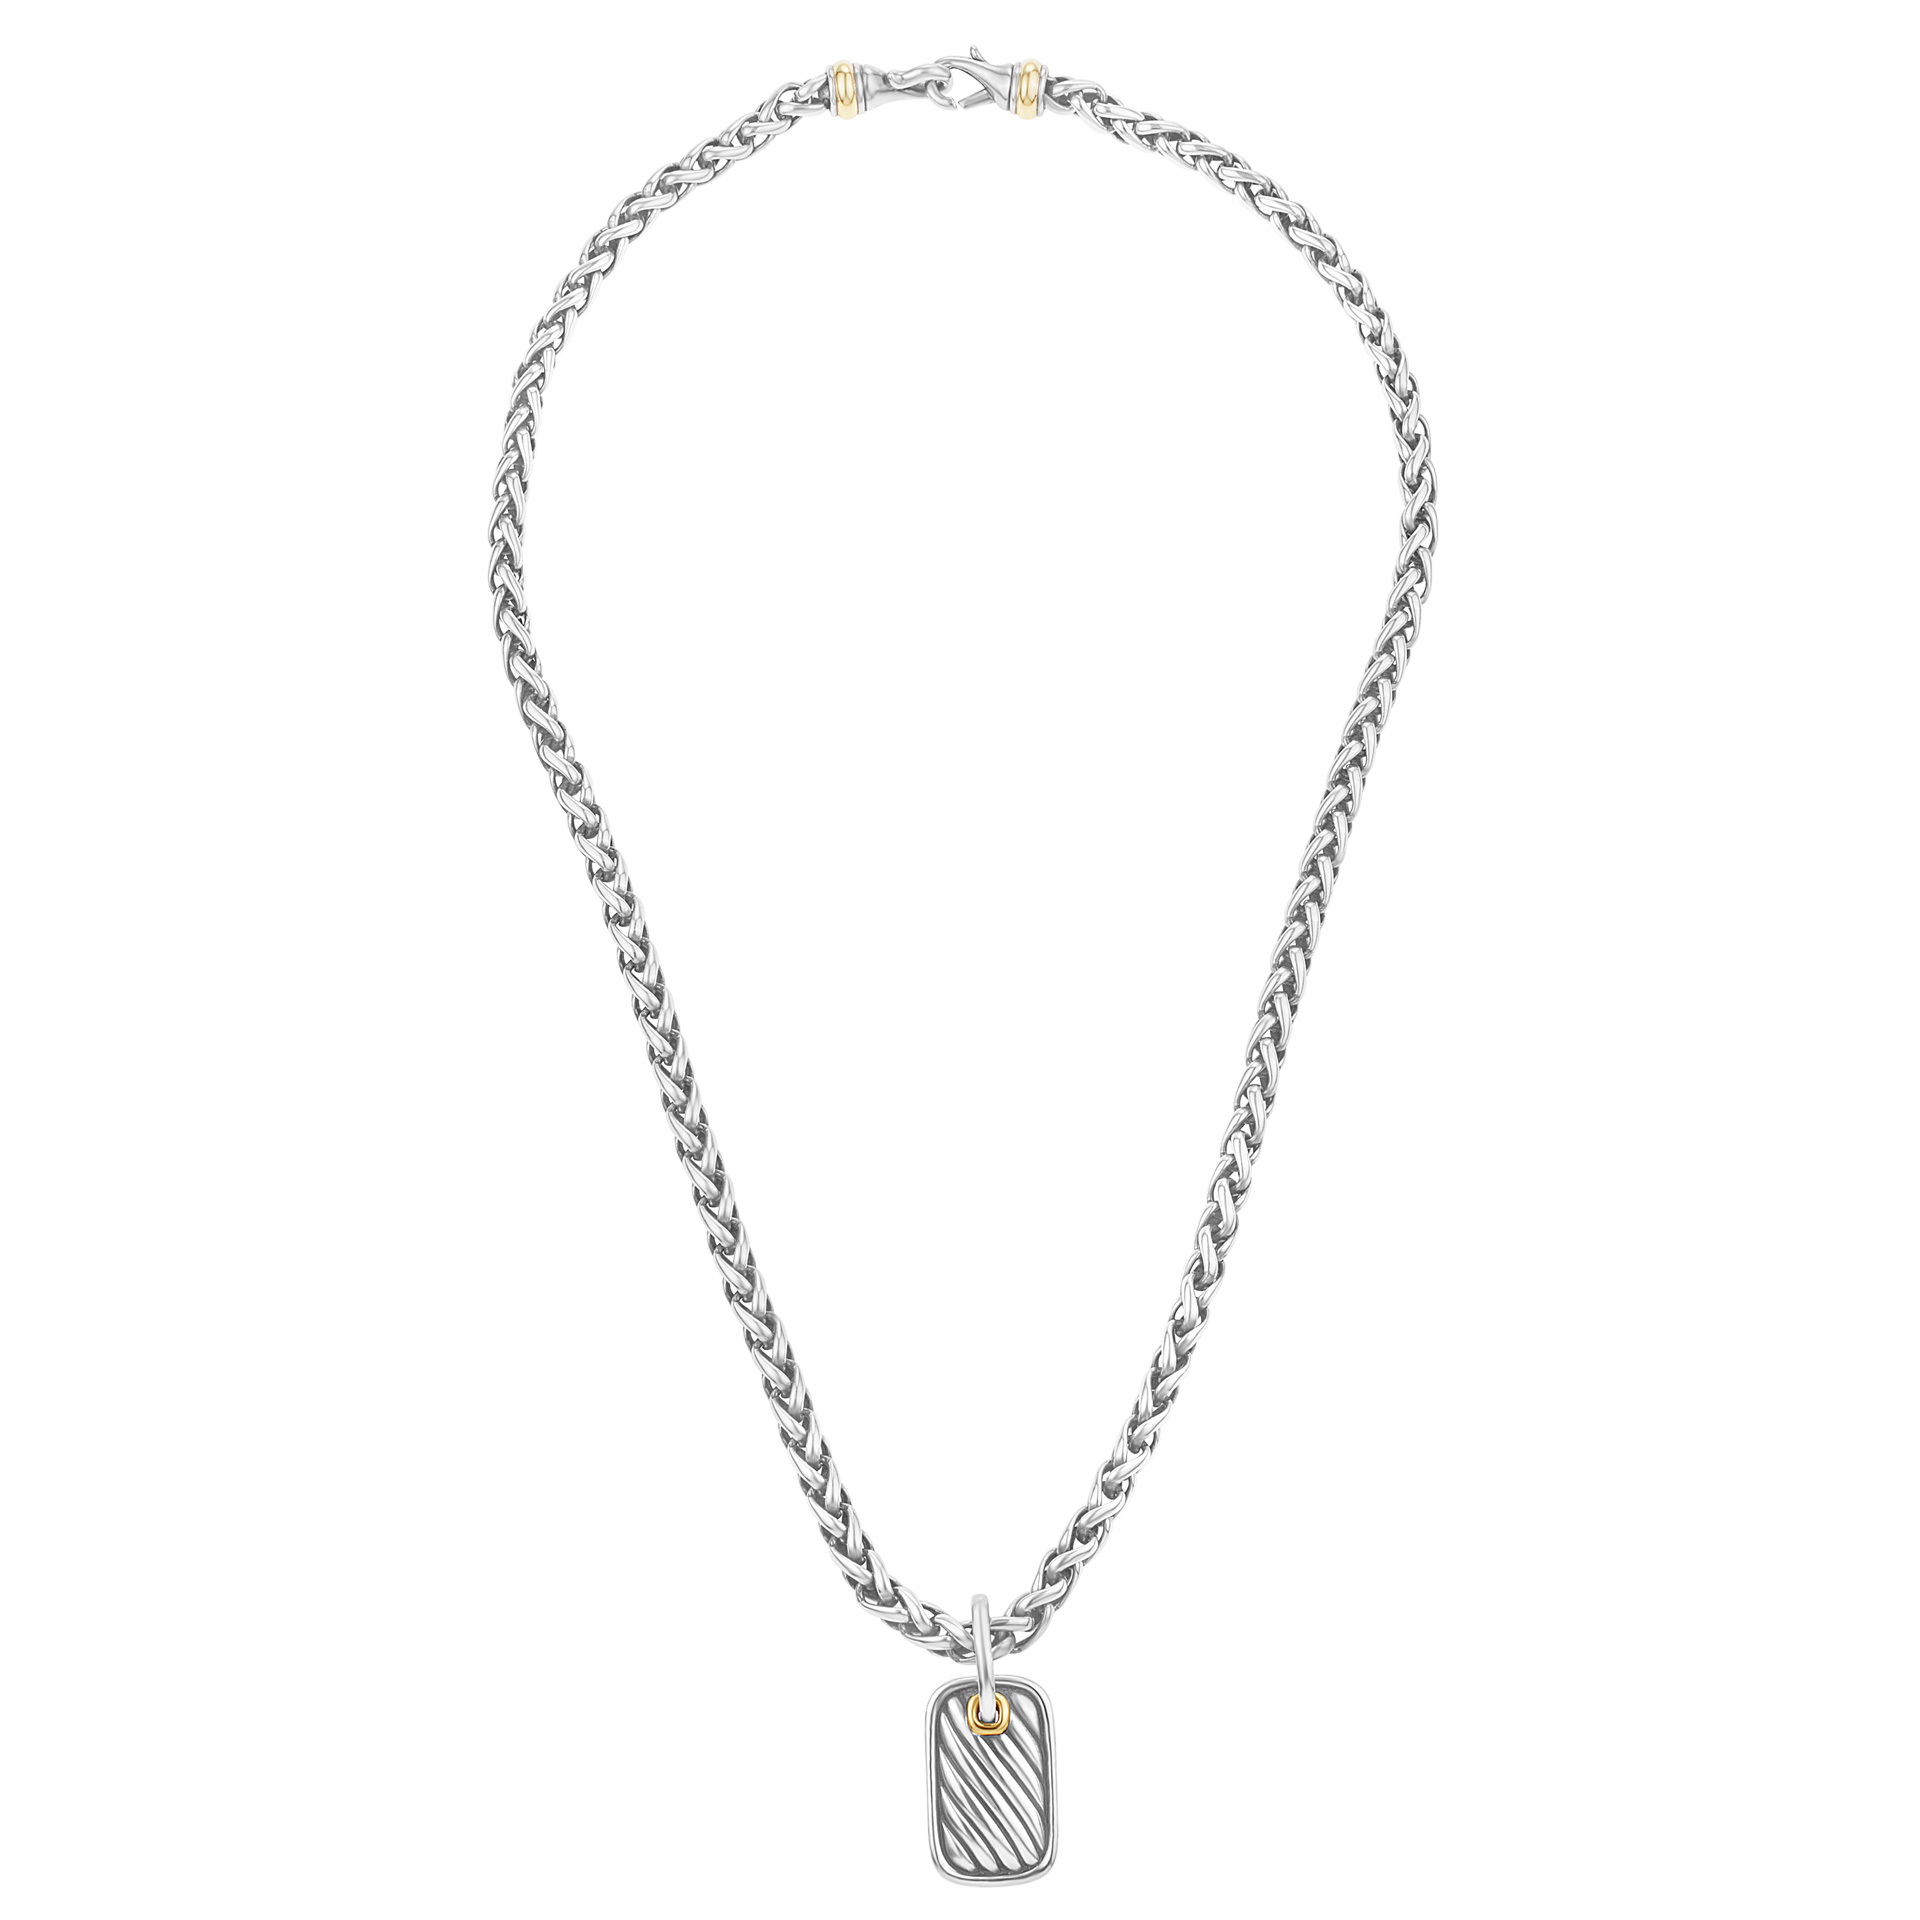 David Yurman chain with pendant in silver and 14k yellow gold